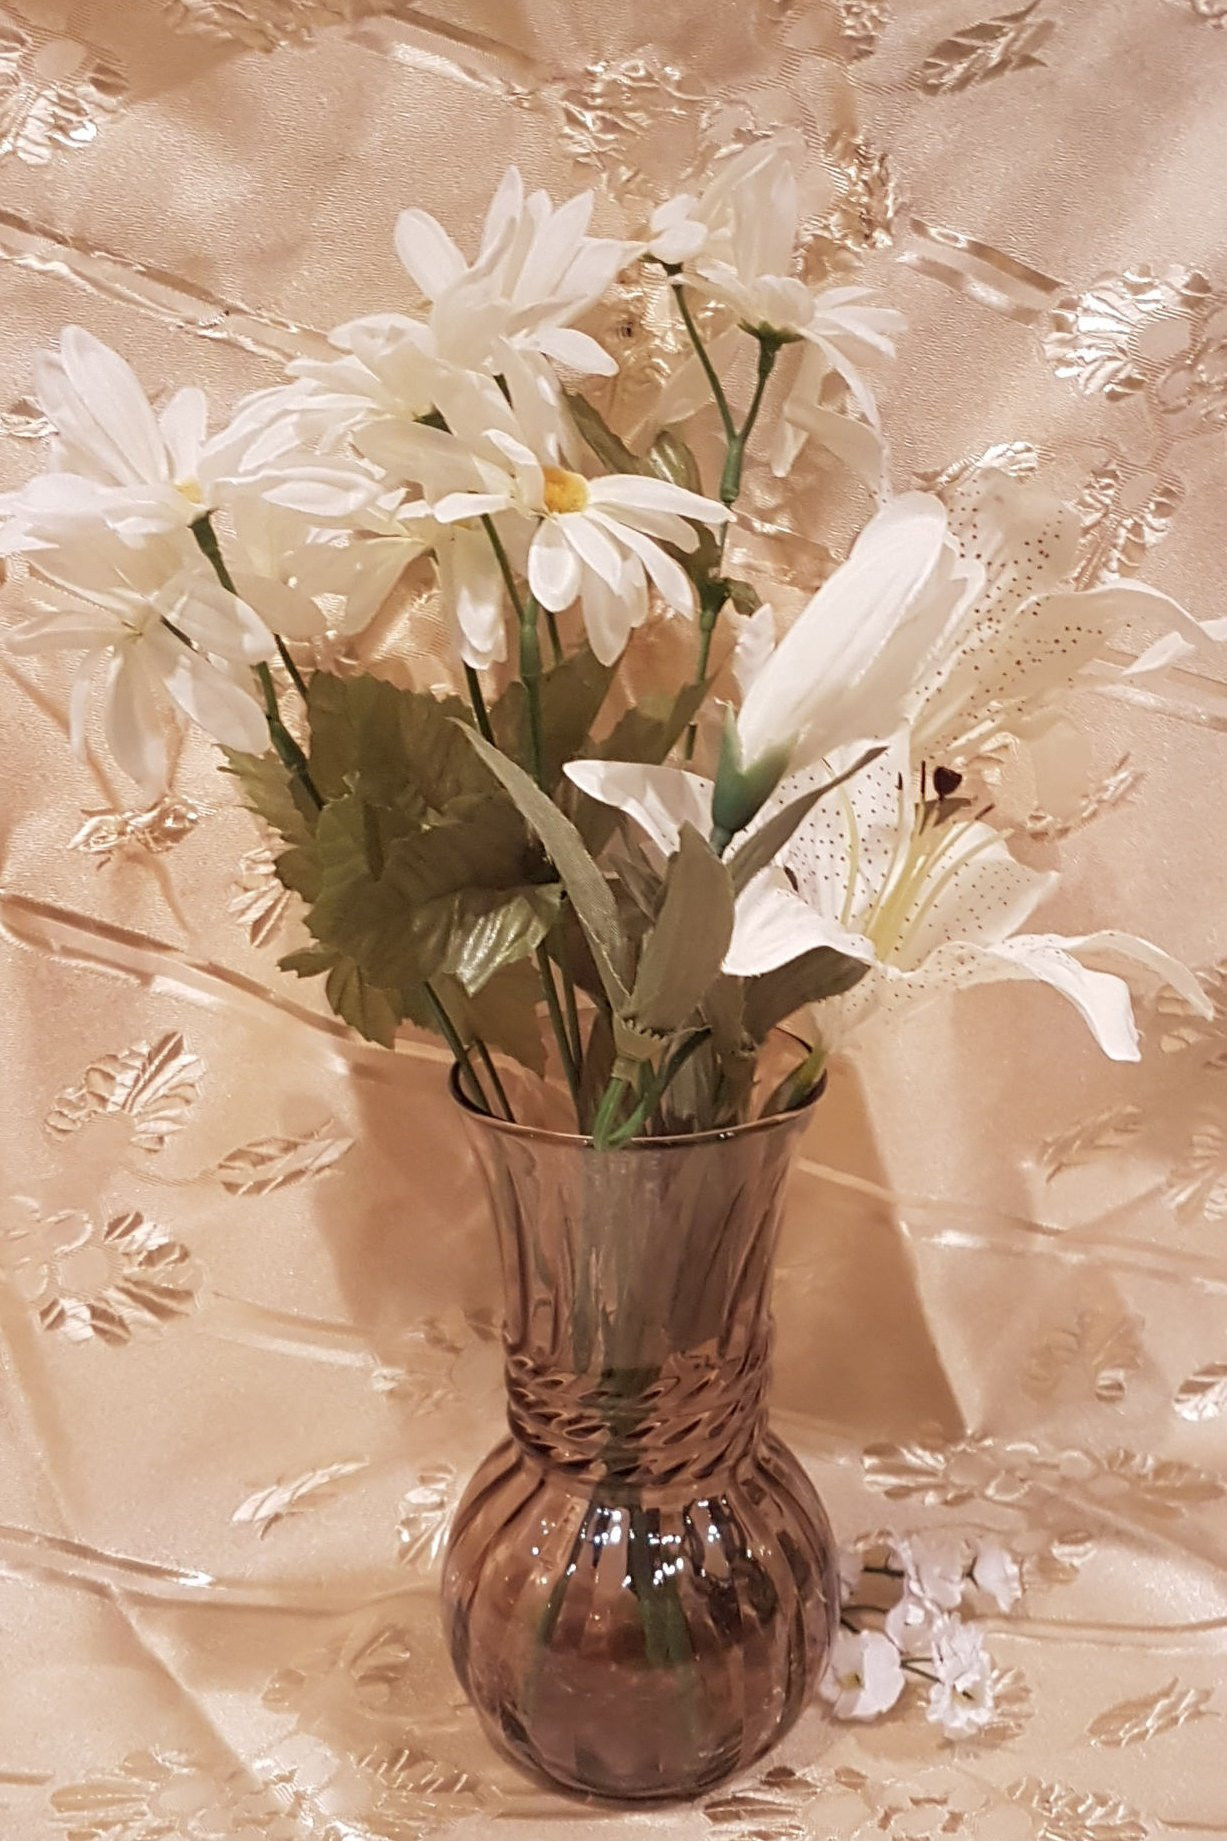 18 Recommended Anchor Hocking Glass Vases 2022 free download anchor hocking glass vases of anchor hocking vintage smoke brown optic swirl glass vase pertaining to il fullxfull 1478200881 4sau